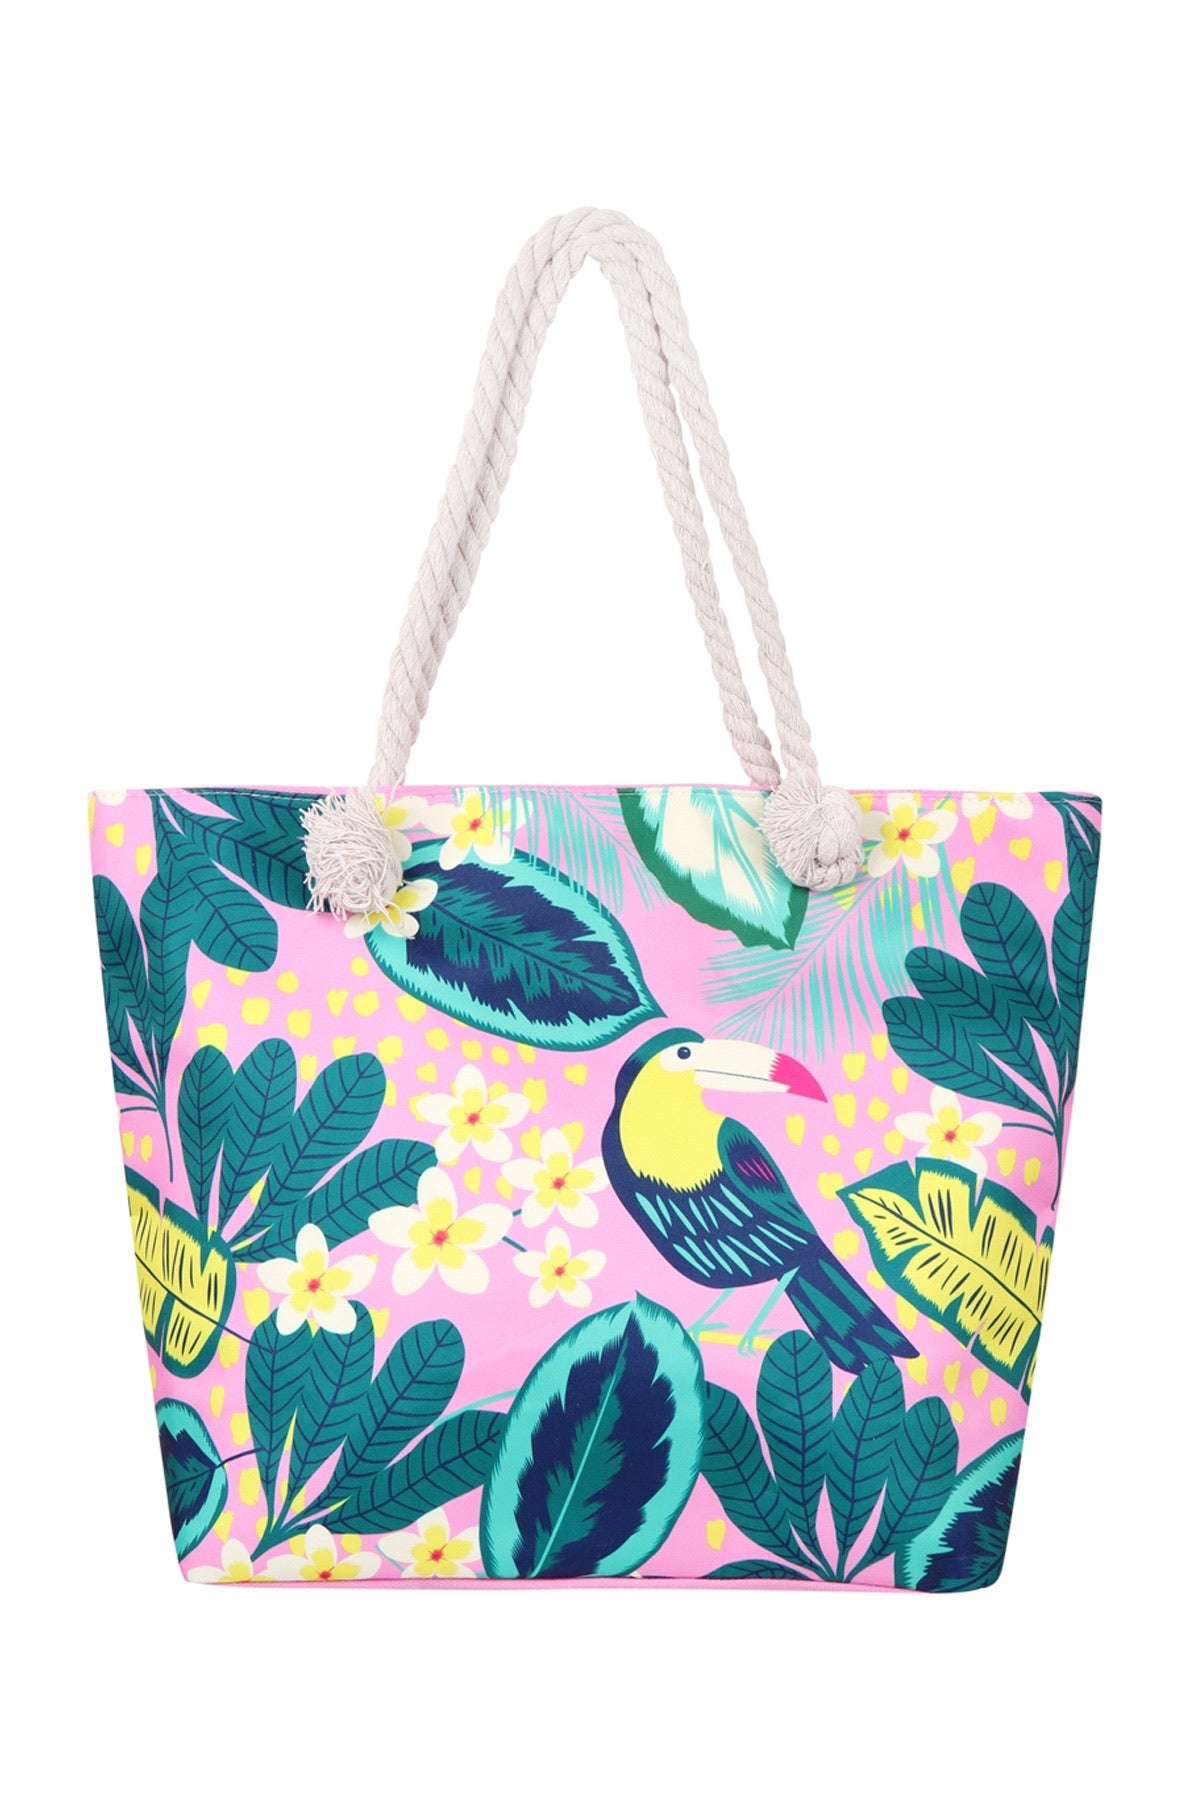 Pink toucan tote